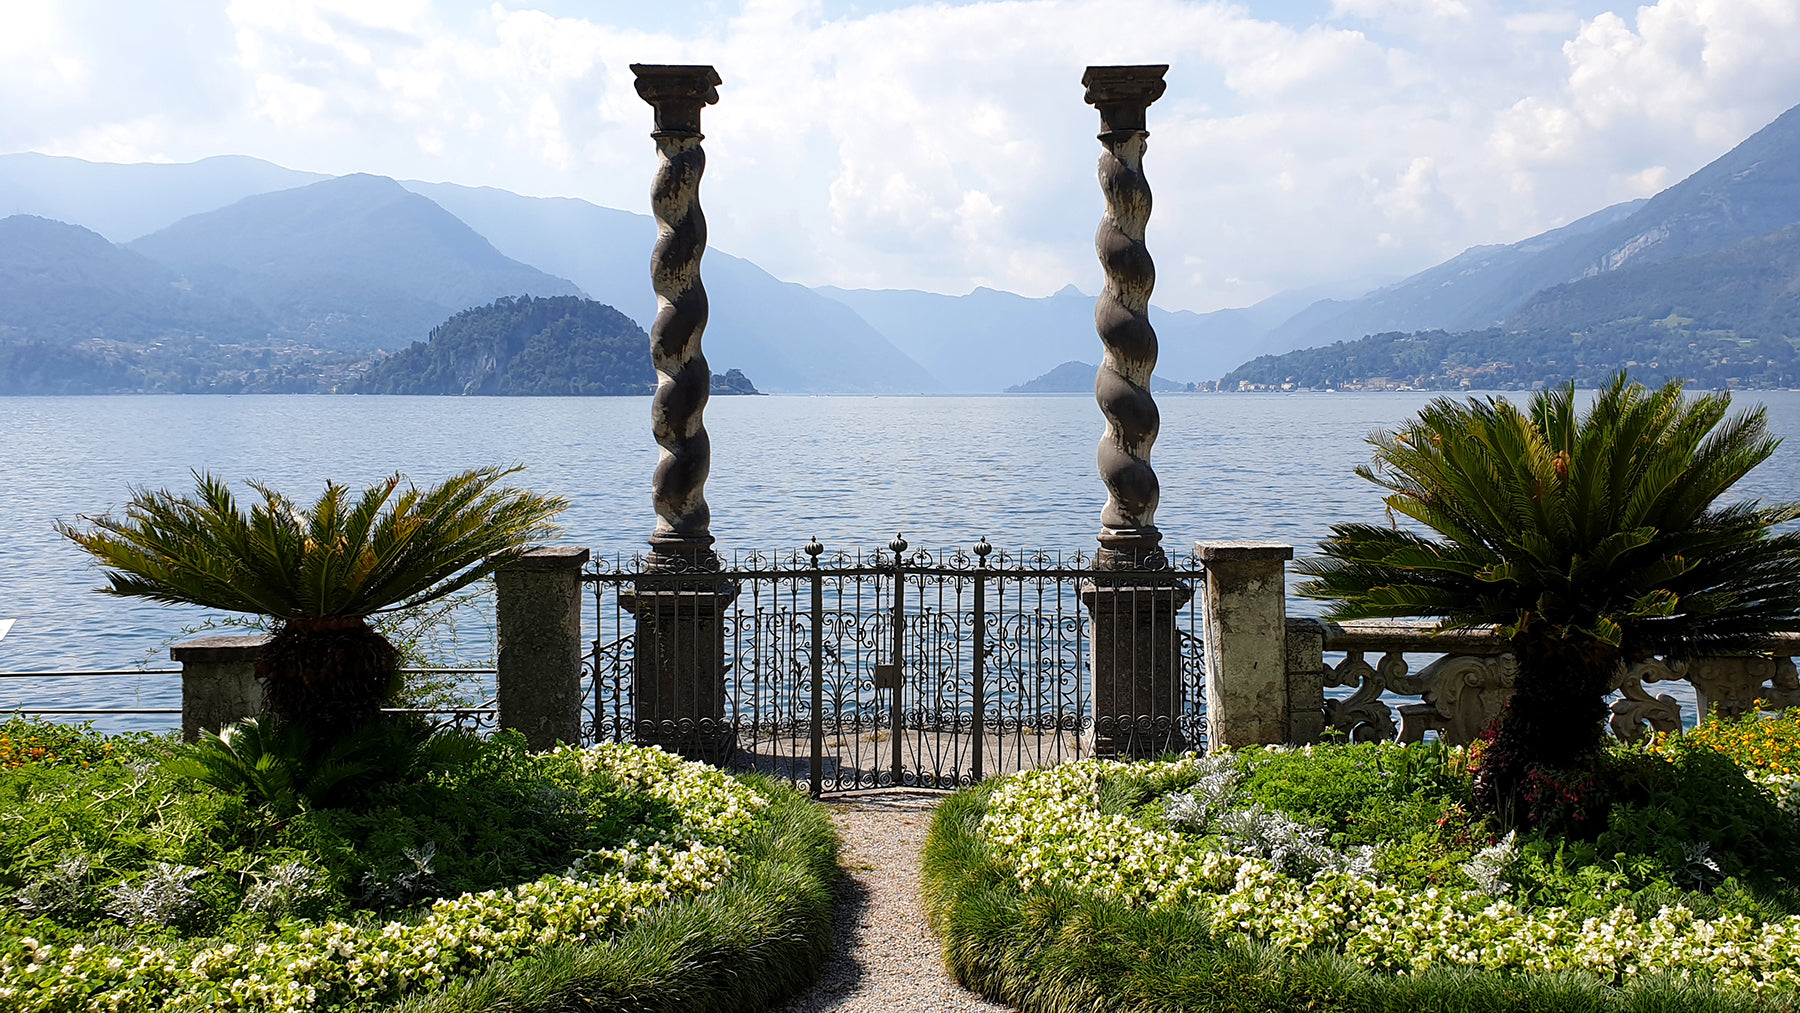 72 HOURS IN THE GARDENS OF LAKE COMO